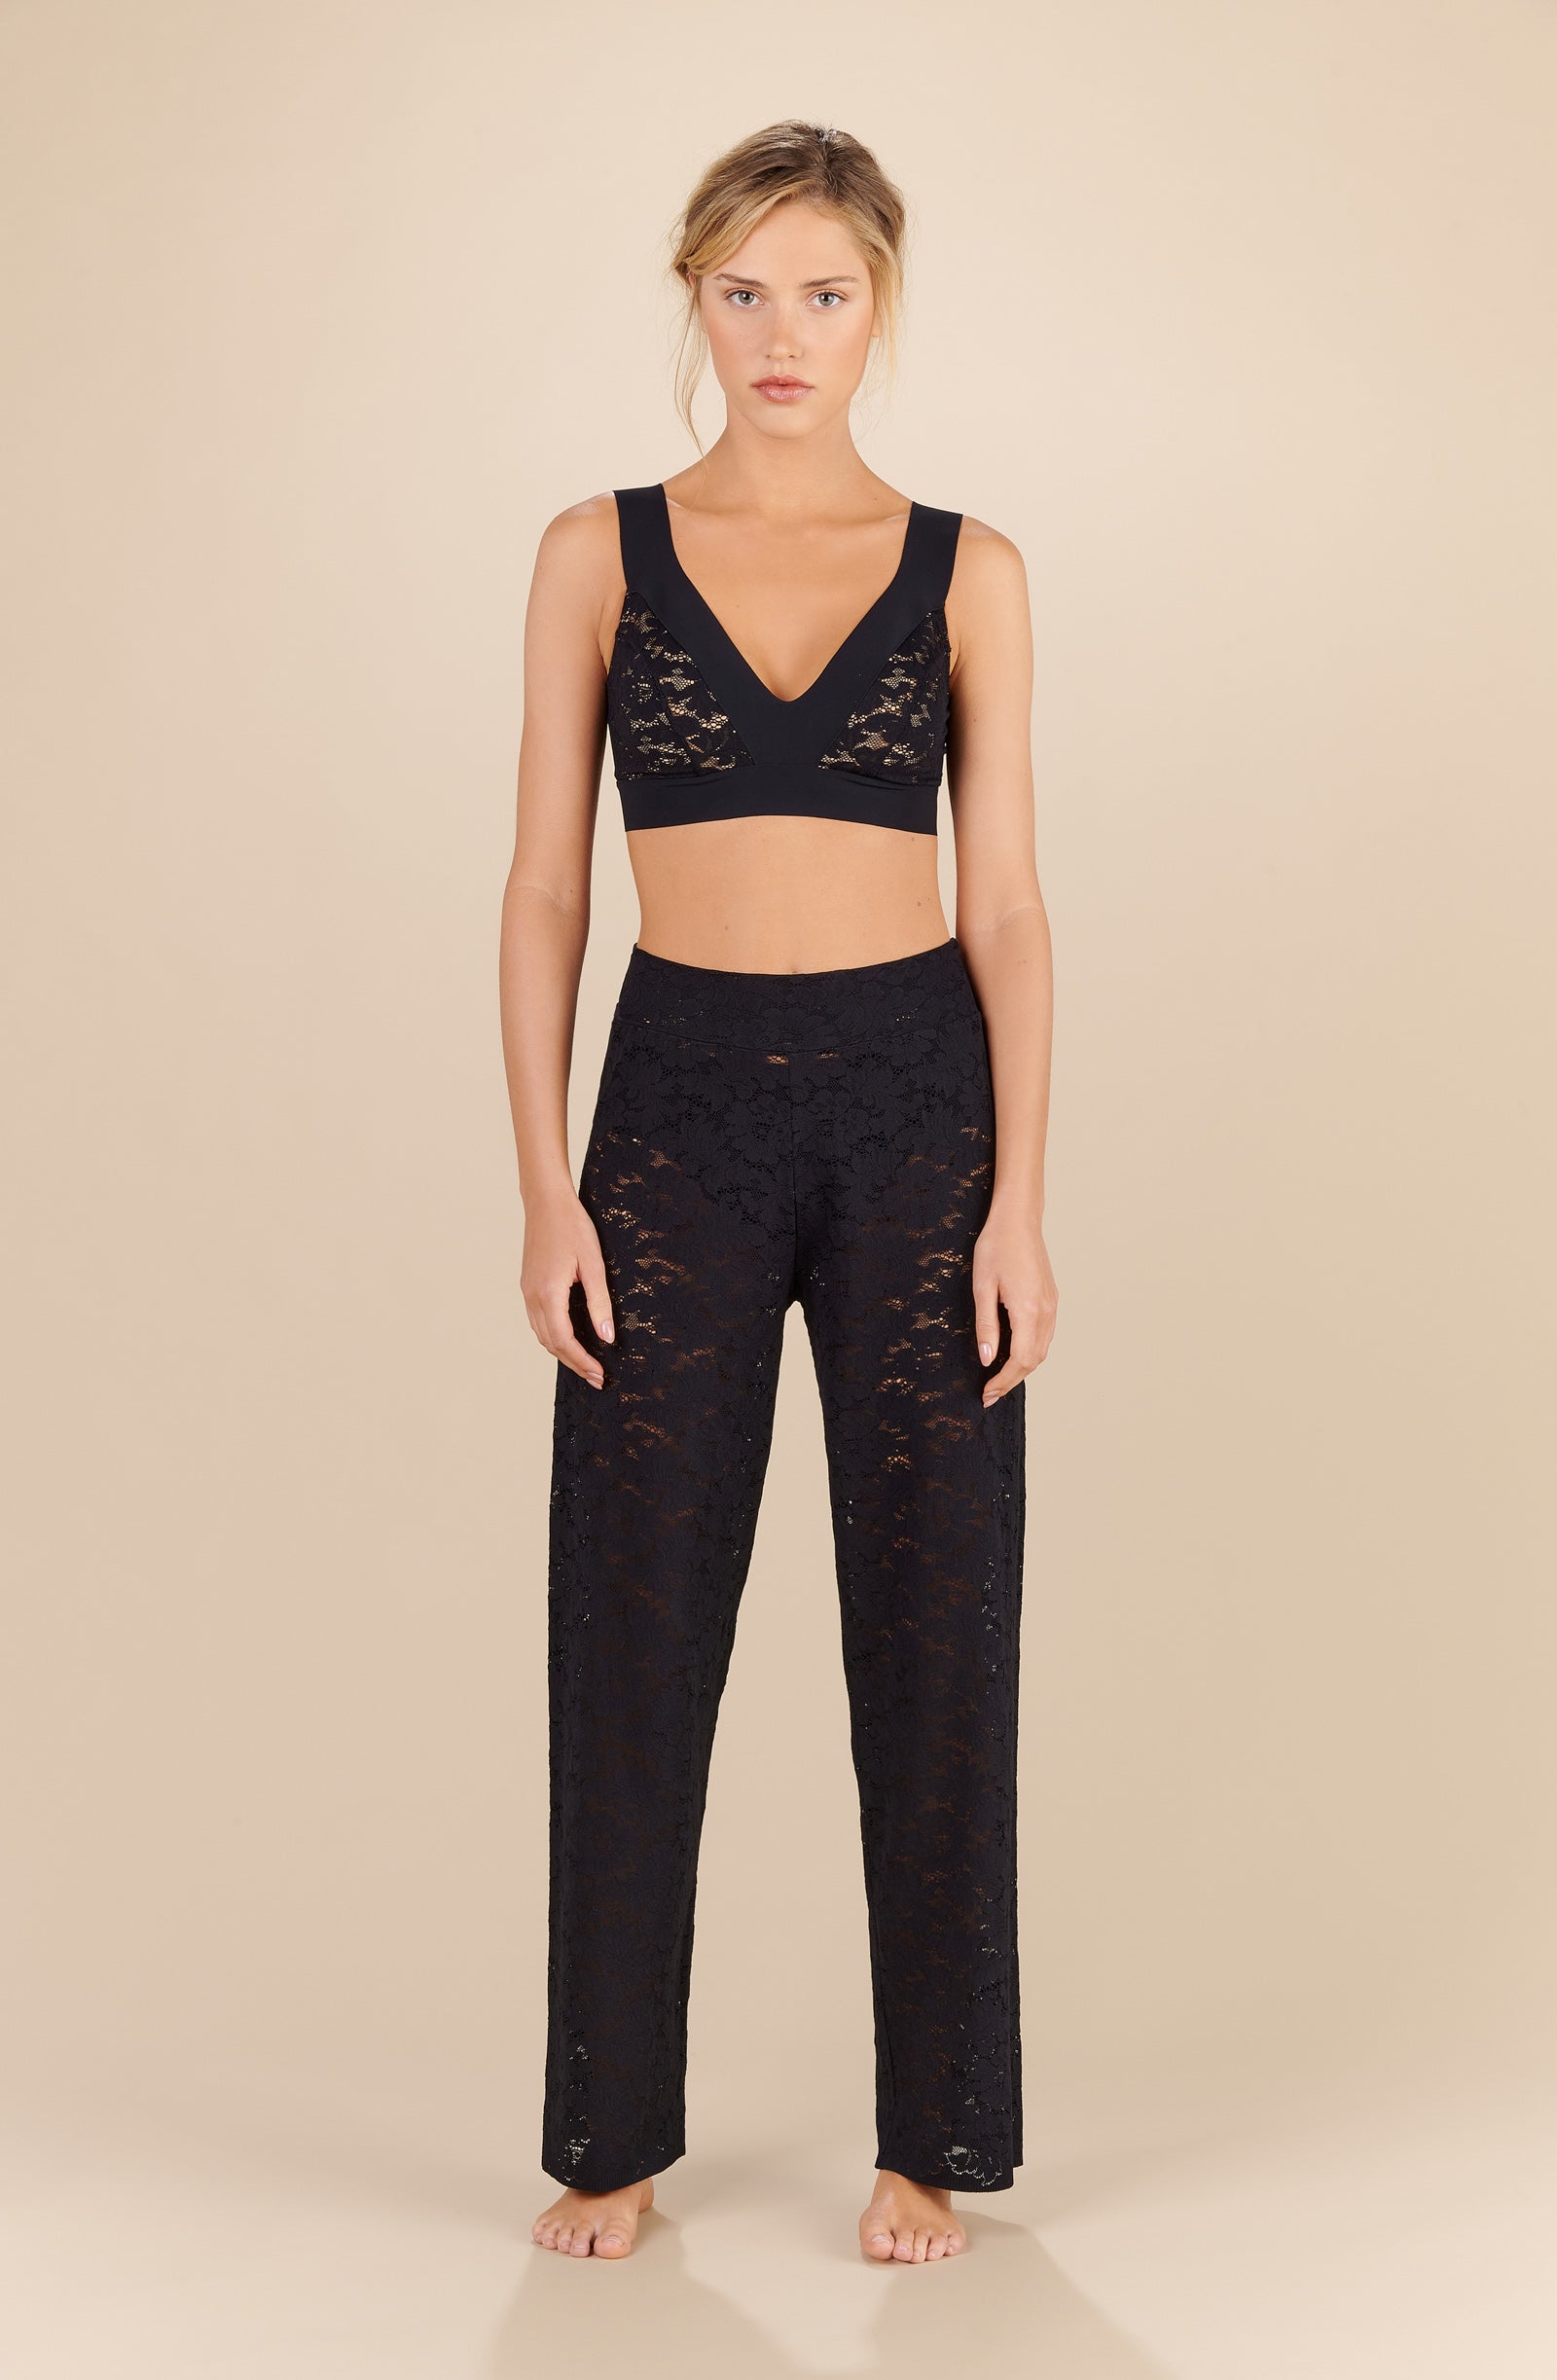 pooja Straight black lace trousers